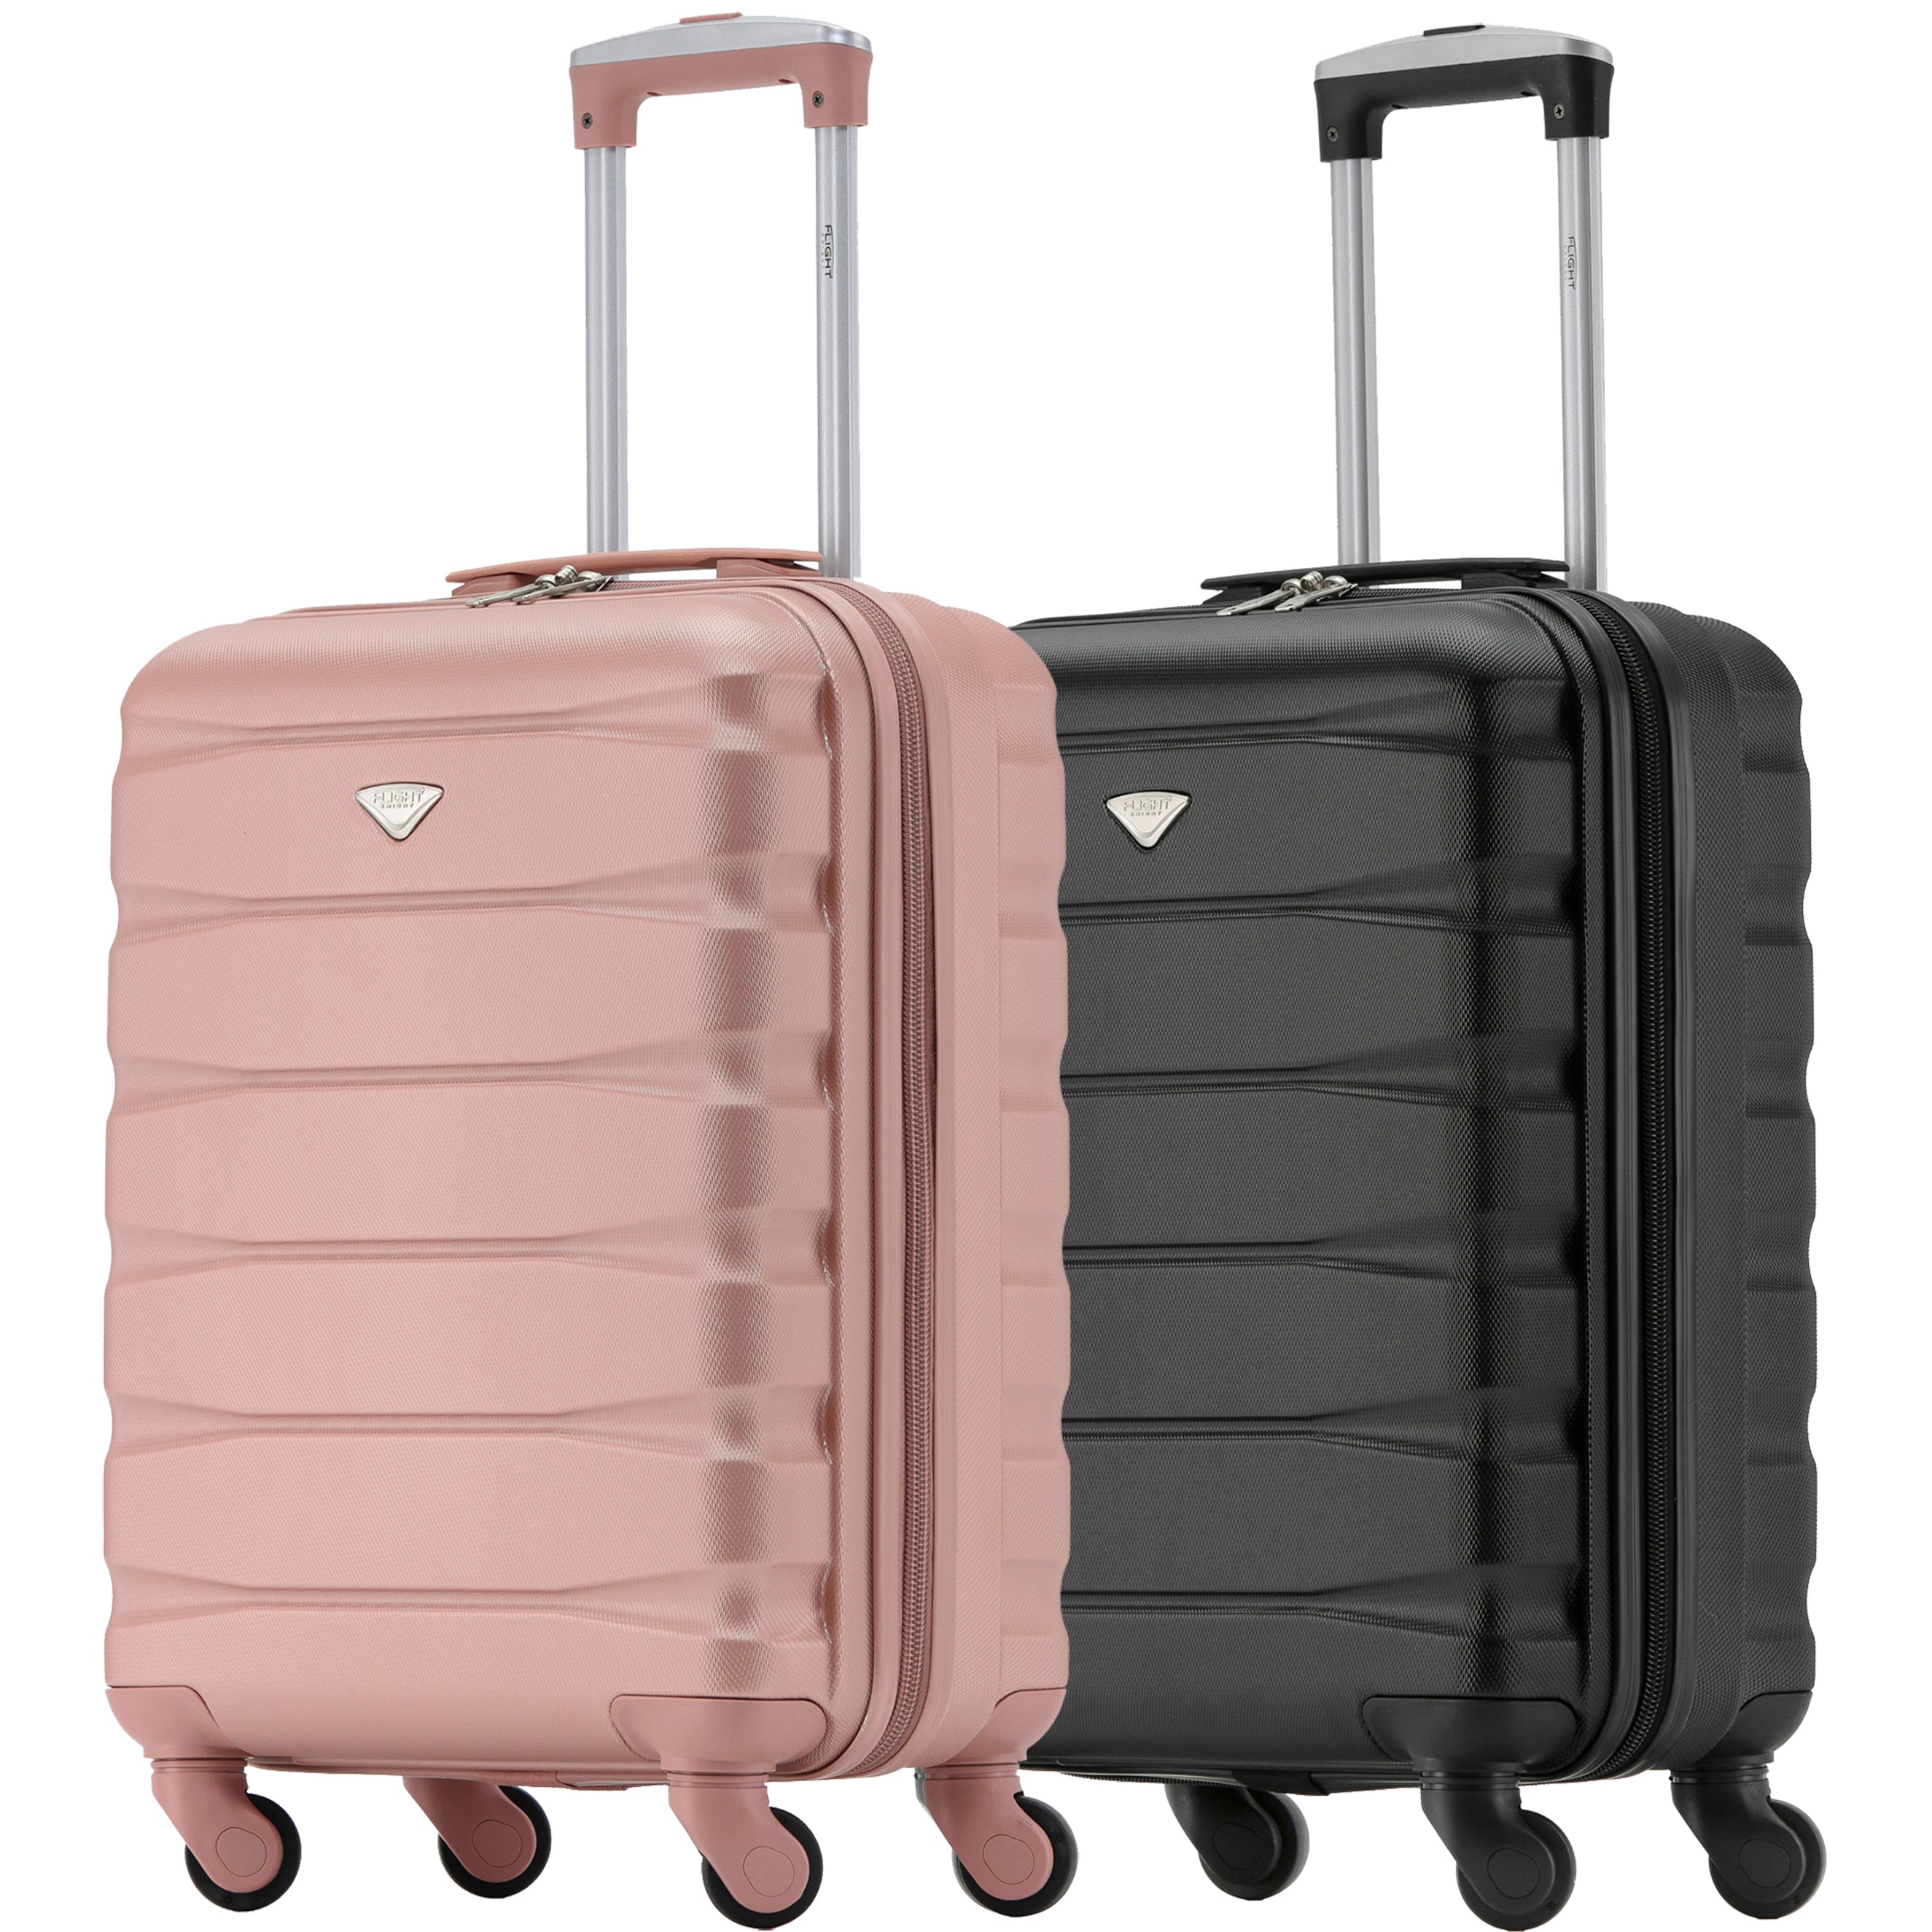 Aerolite - Save on Luggage, Carry ons , aerolite , apparel blankets ,  car... and More!